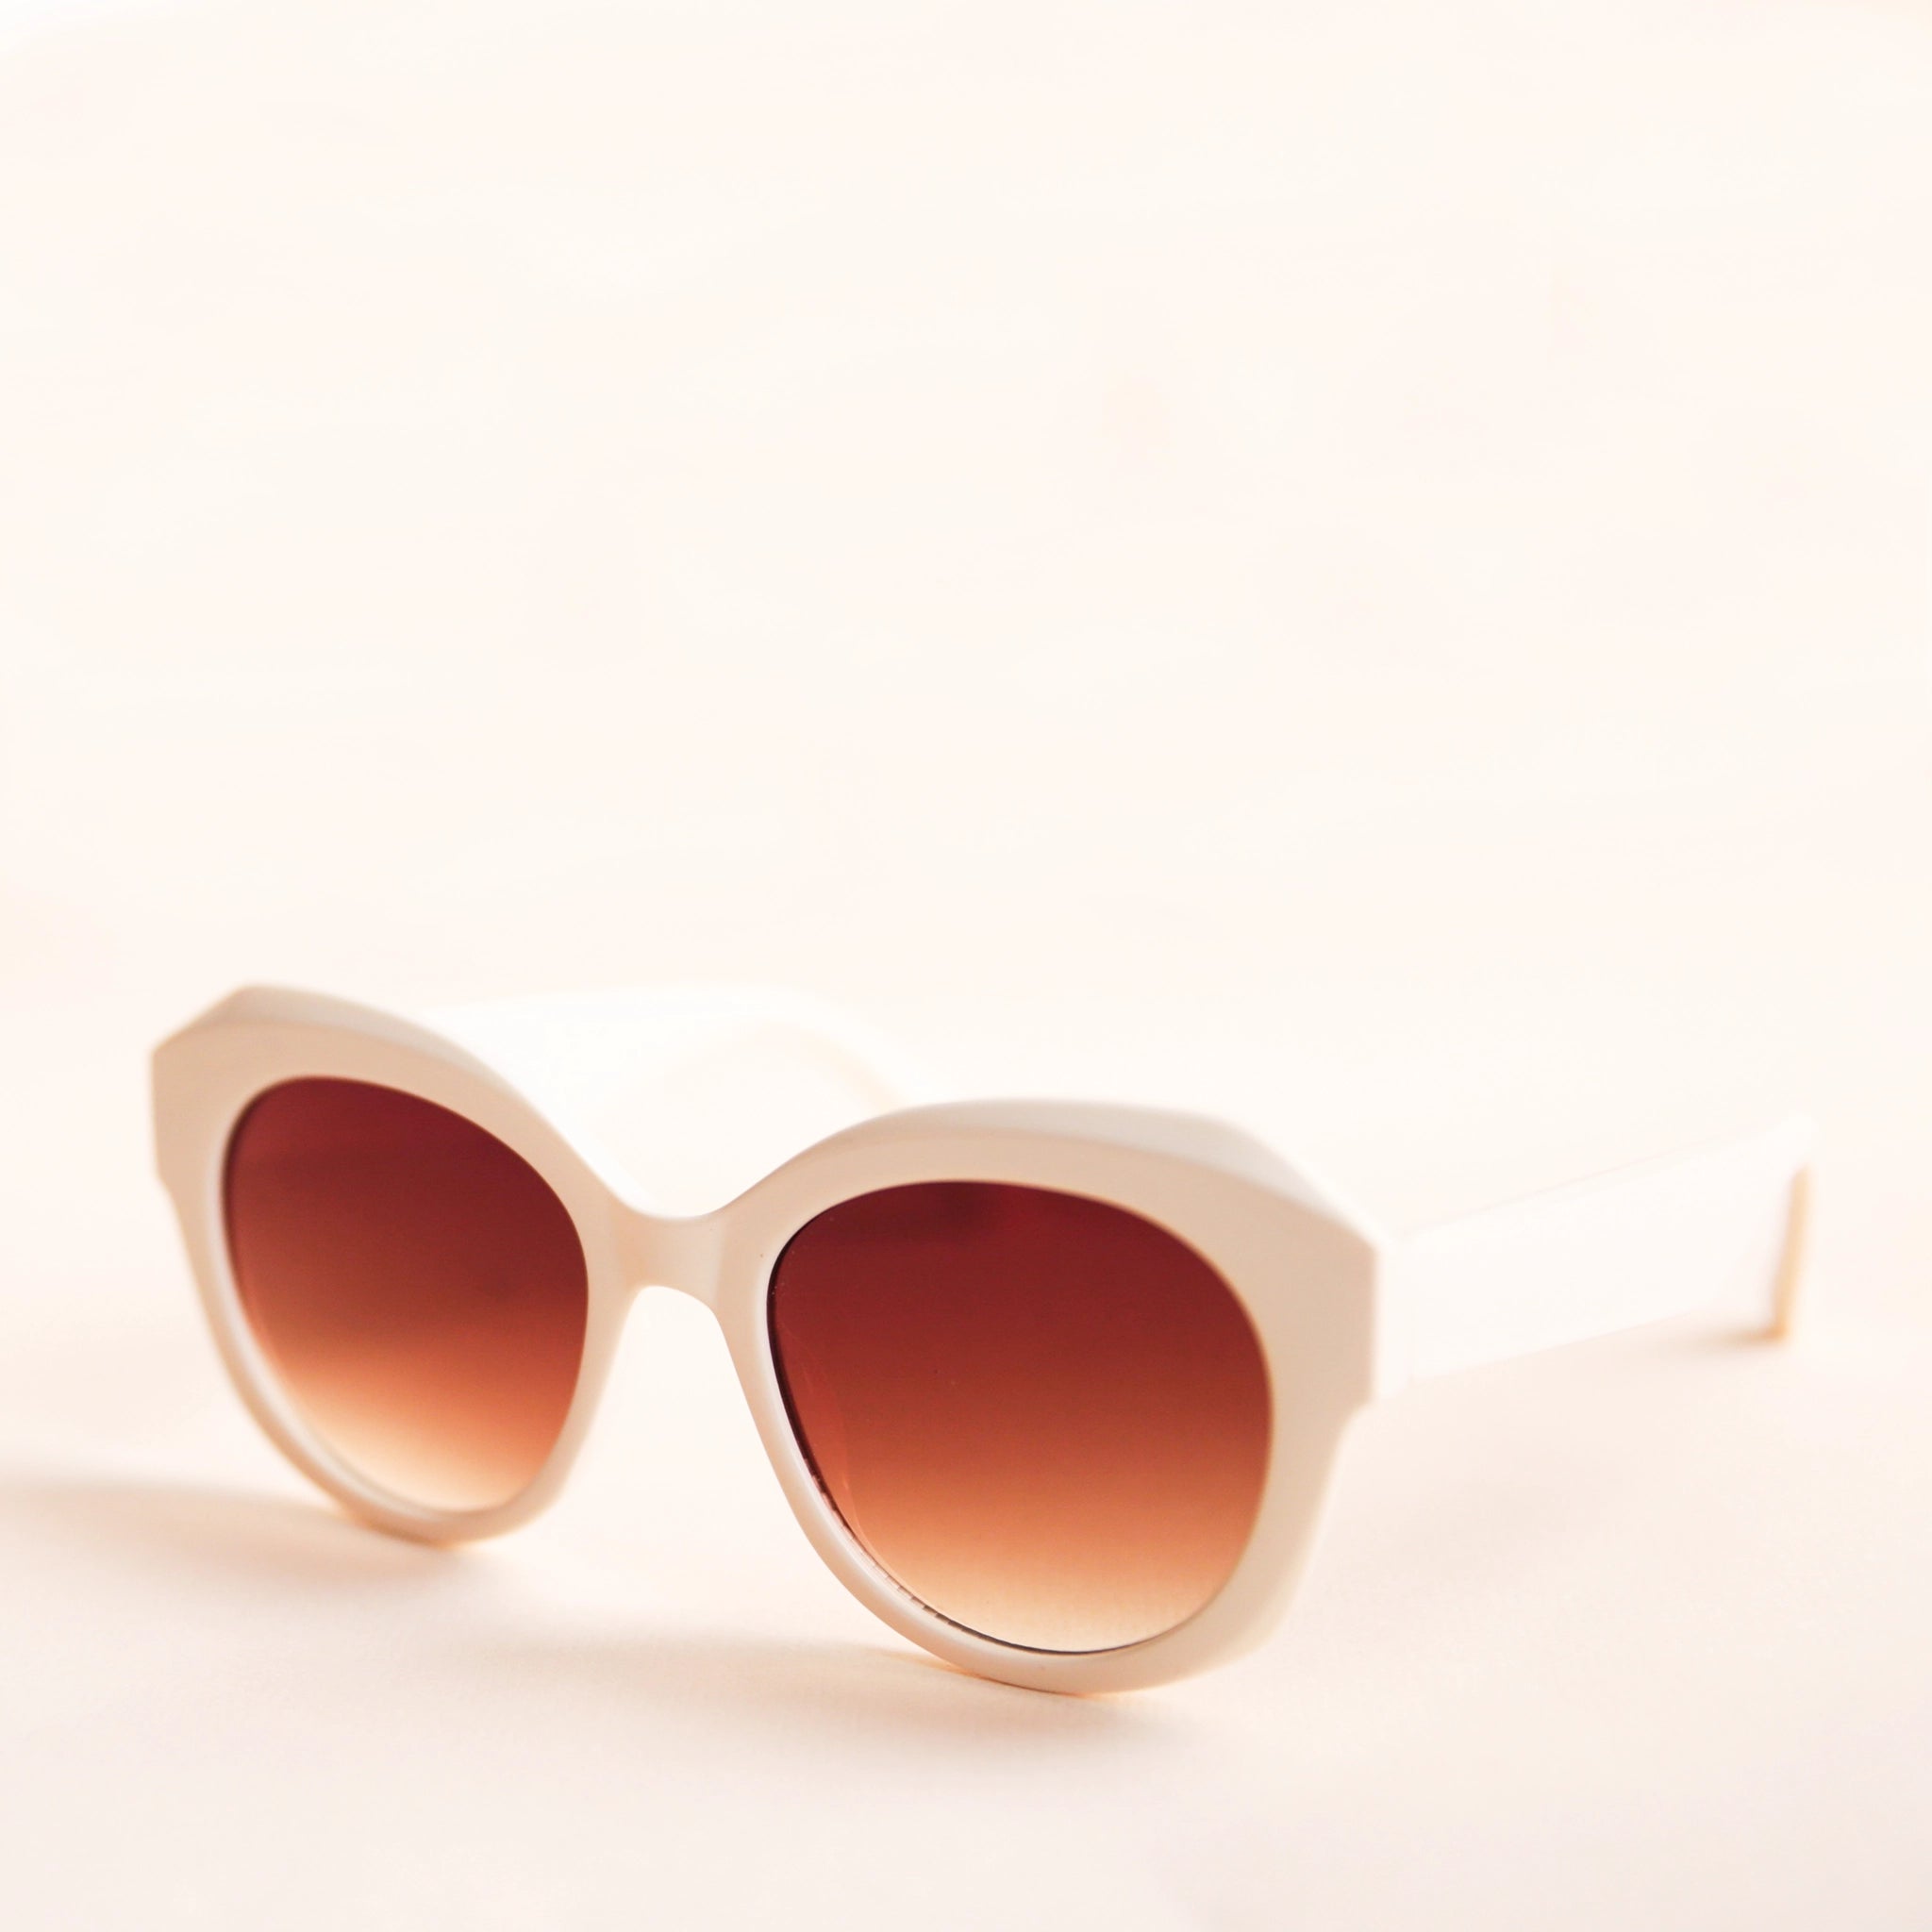 White rounded chunky sunglasses with a brown lens.